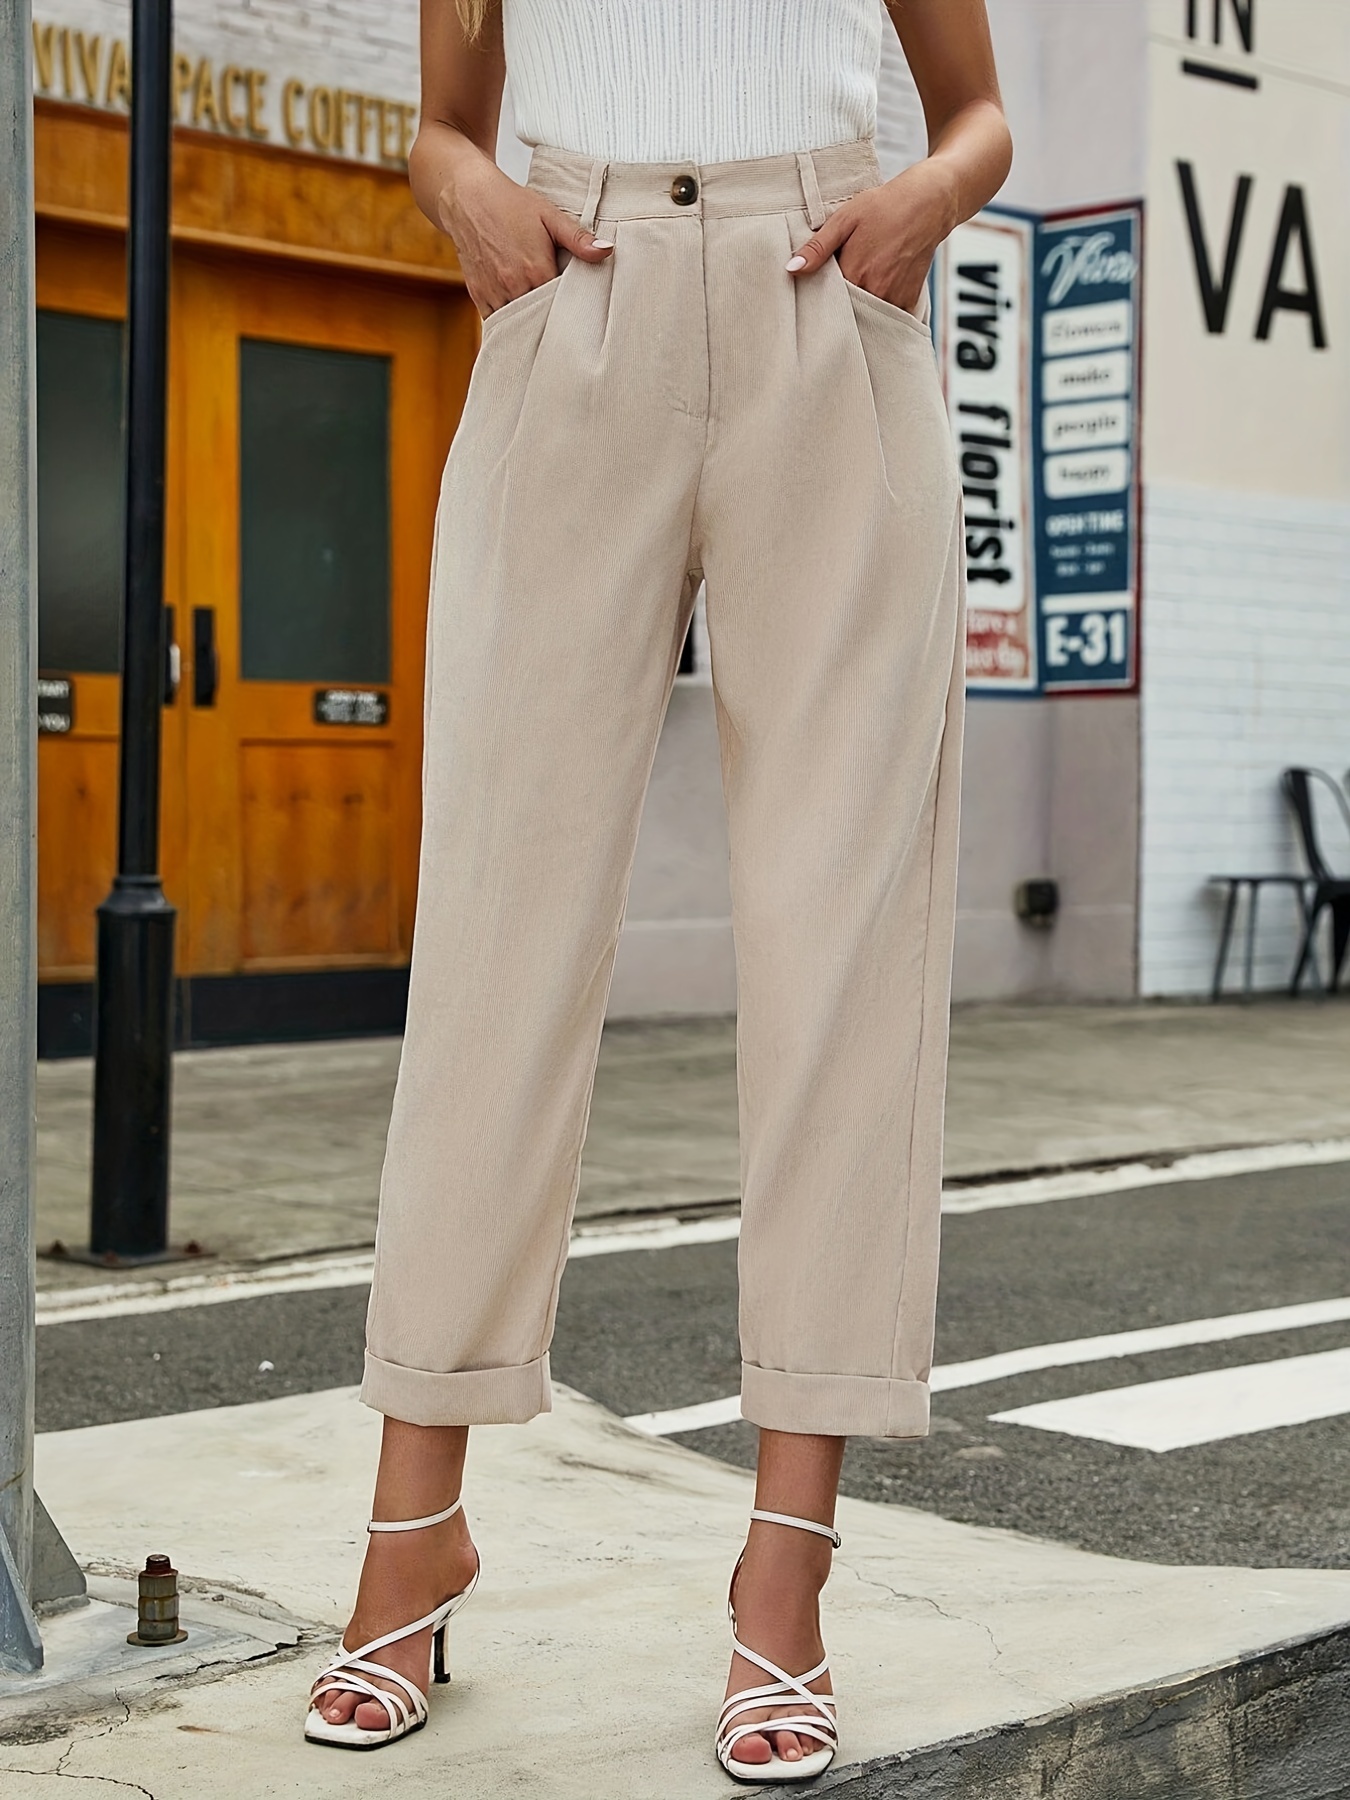 High-waisted Pants, Tapered Trousers, Pleated Work Pants, Tapered Pants,  Formal Trousers, Dress Pants for Work, Relaxed Fit Pants, Work Suit 